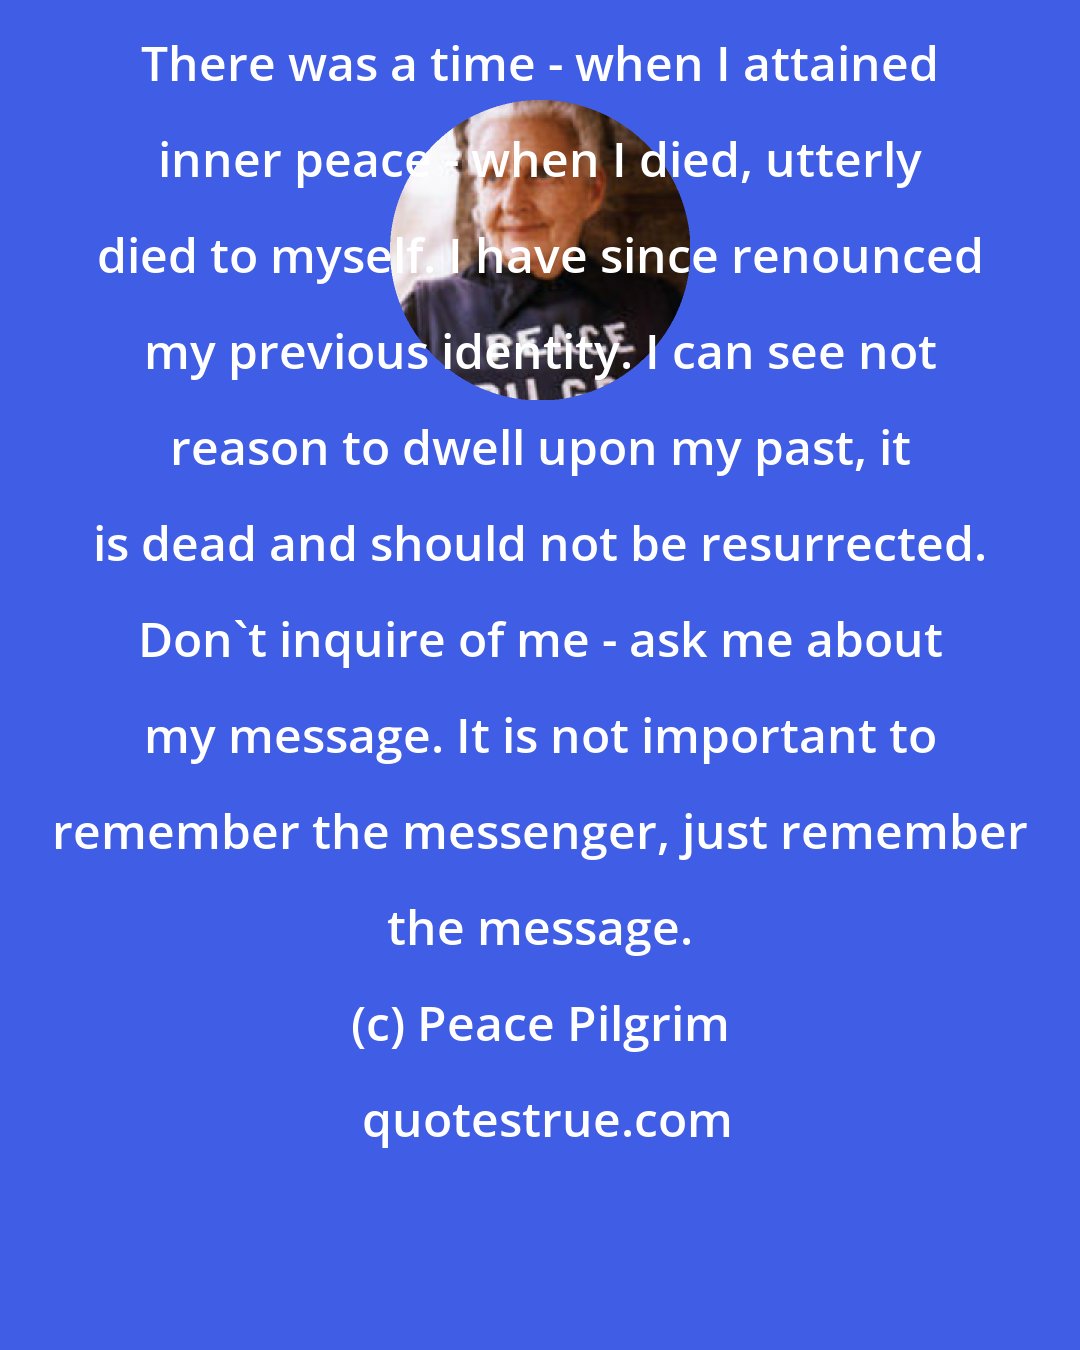 Peace Pilgrim: There was a time - when I attained inner peace - when I died, utterly died to myself. I have since renounced my previous identity. I can see not reason to dwell upon my past, it is dead and should not be resurrected. Don't inquire of me - ask me about my message. It is not important to remember the messenger, just remember the message.